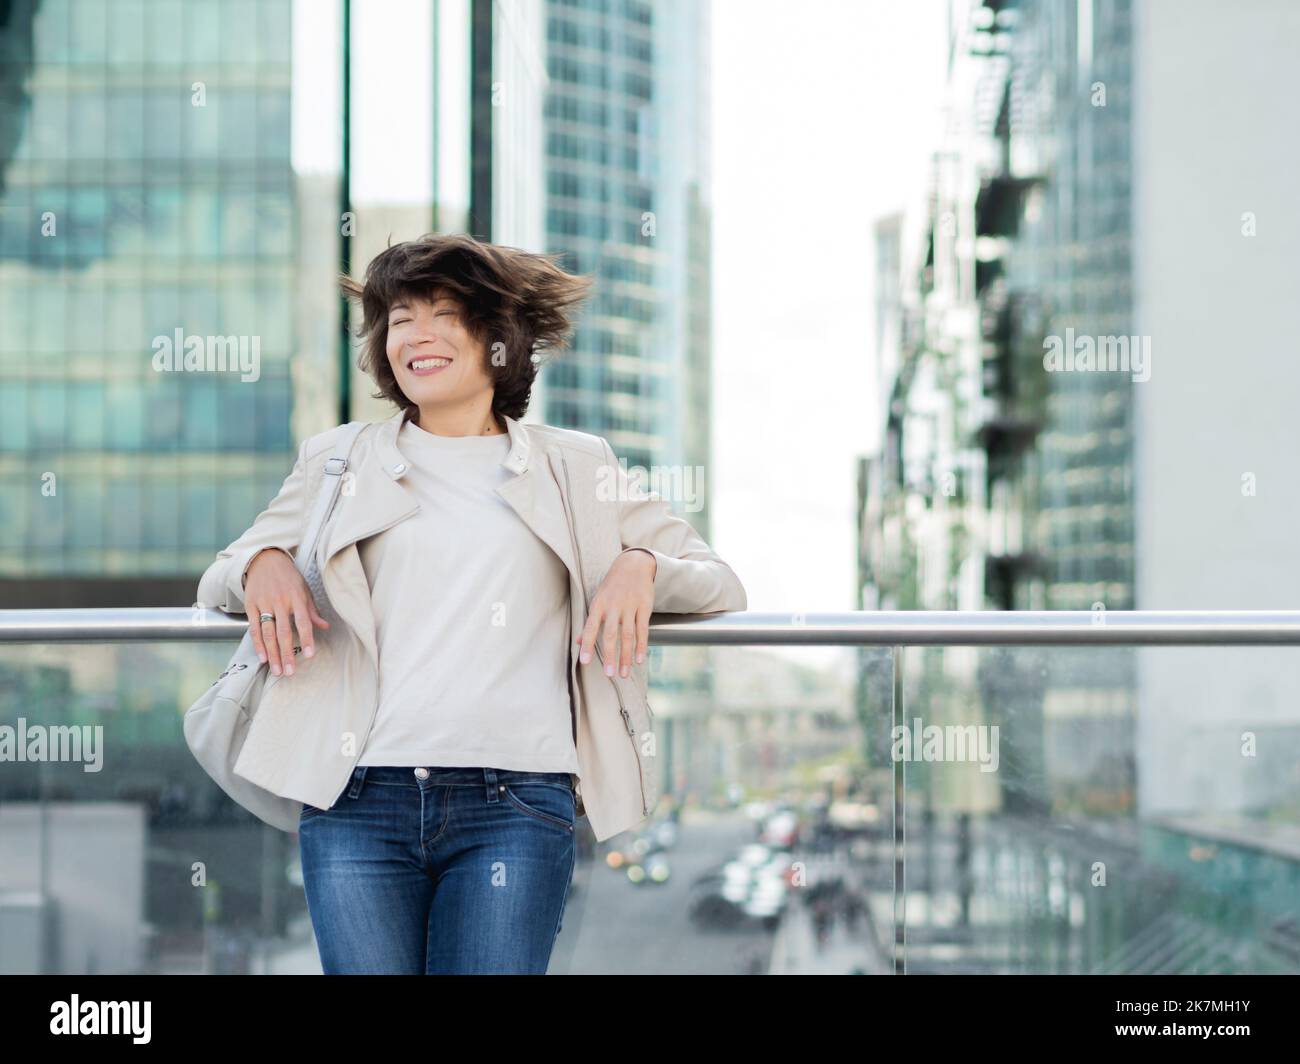 Smiling woman with ruffled hair on background of modern buildings. Downtown with skyscrapers and finance business centers. Urban lifestyle Stock Photo